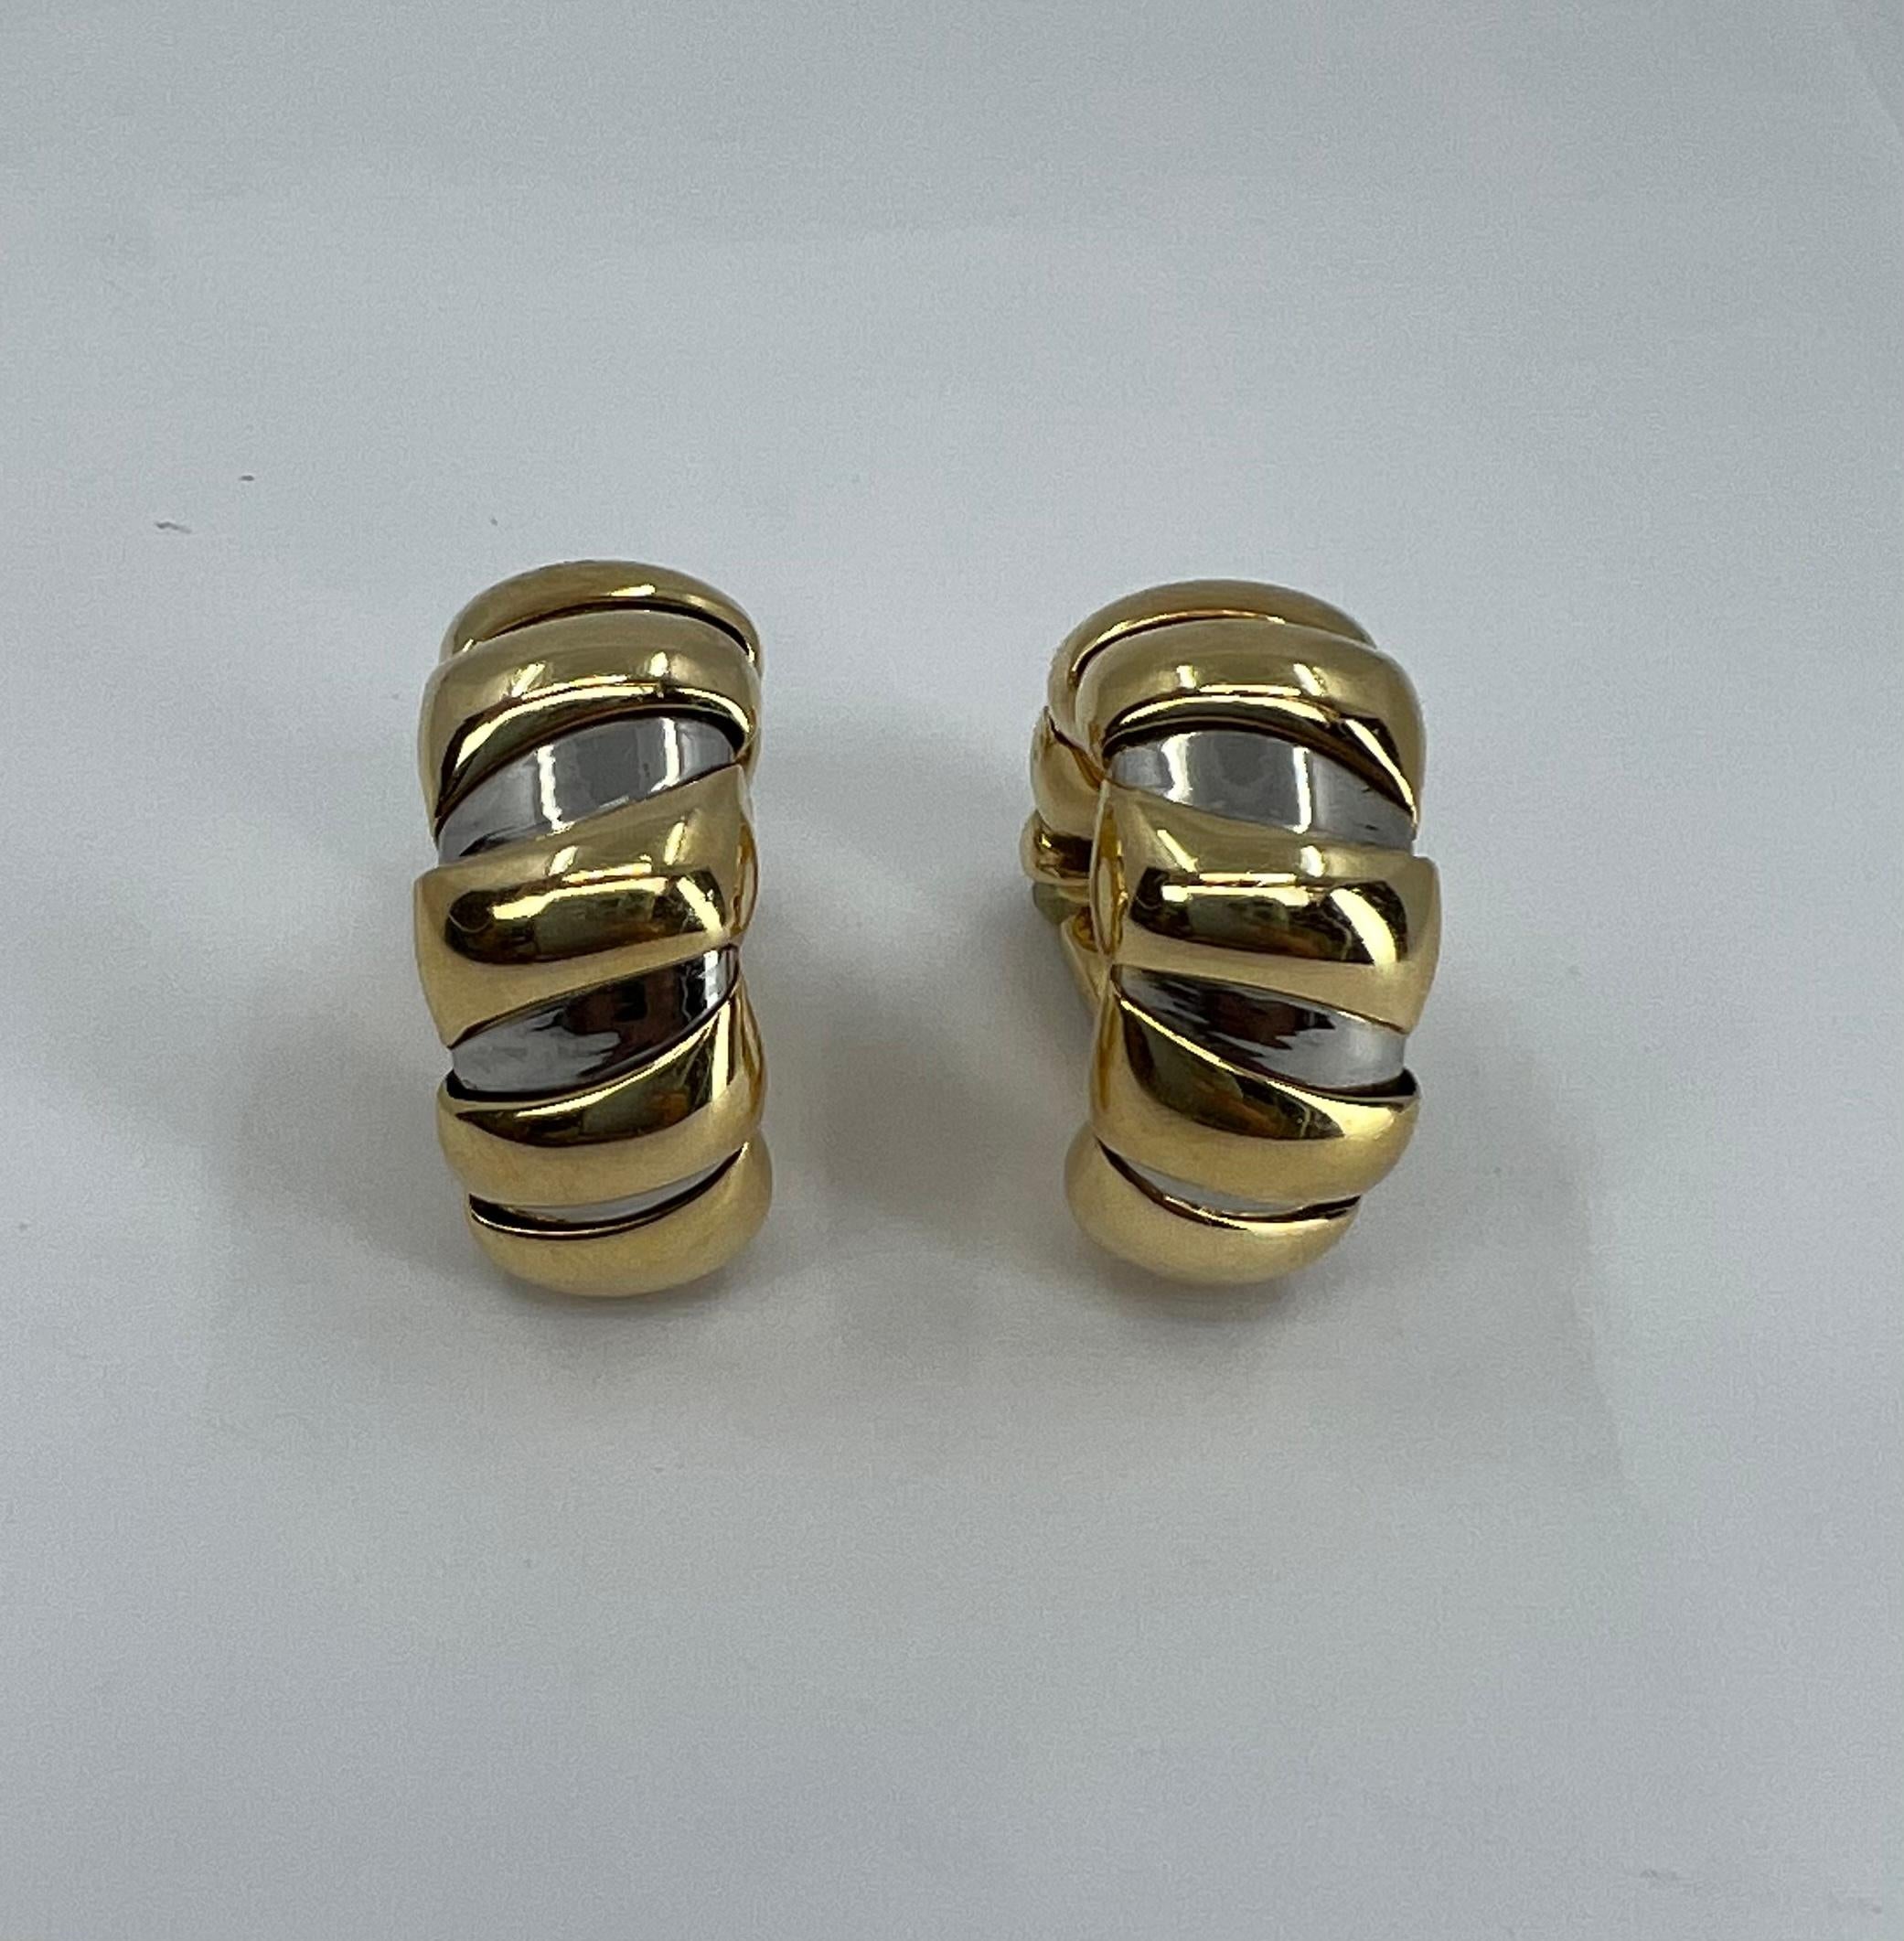 A pair of Bulgari Tubogas earrings in stainless steel and 18k gold.
Iconic Bulgari Tubogas design comes in a wide variety of materials and shapes. These hoop earrings were made by using a stainless steel coil as a base. A thick gold wire is twisted